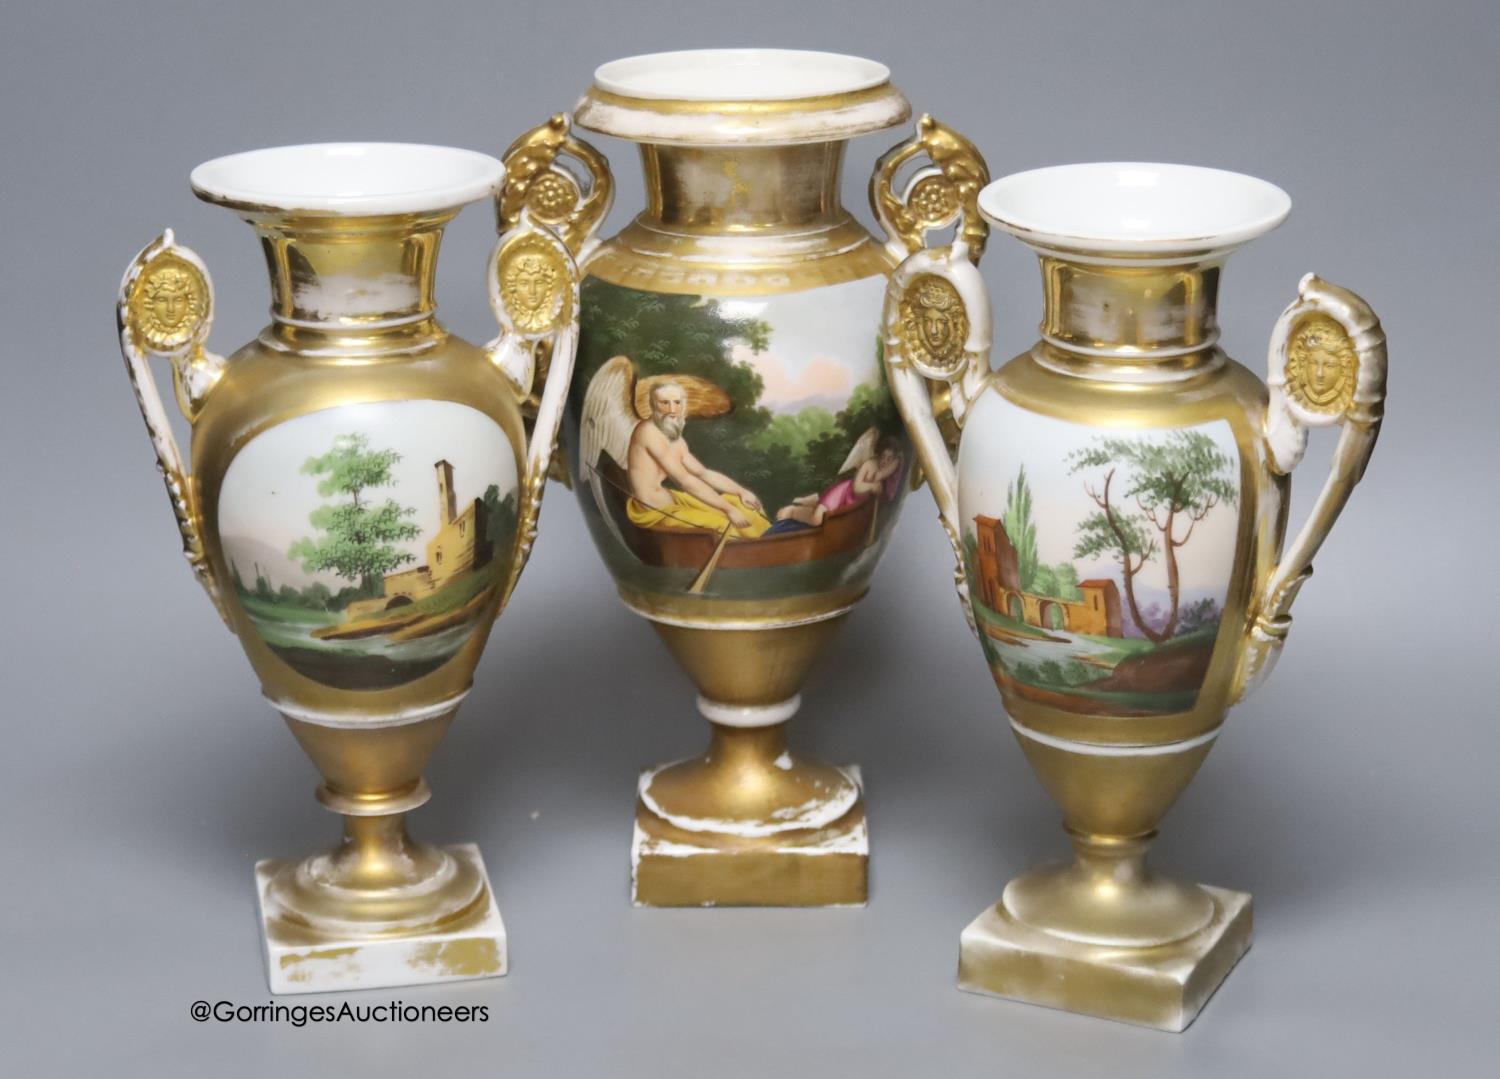 A 19th century French porcelain garniture of three vases, height 27cm